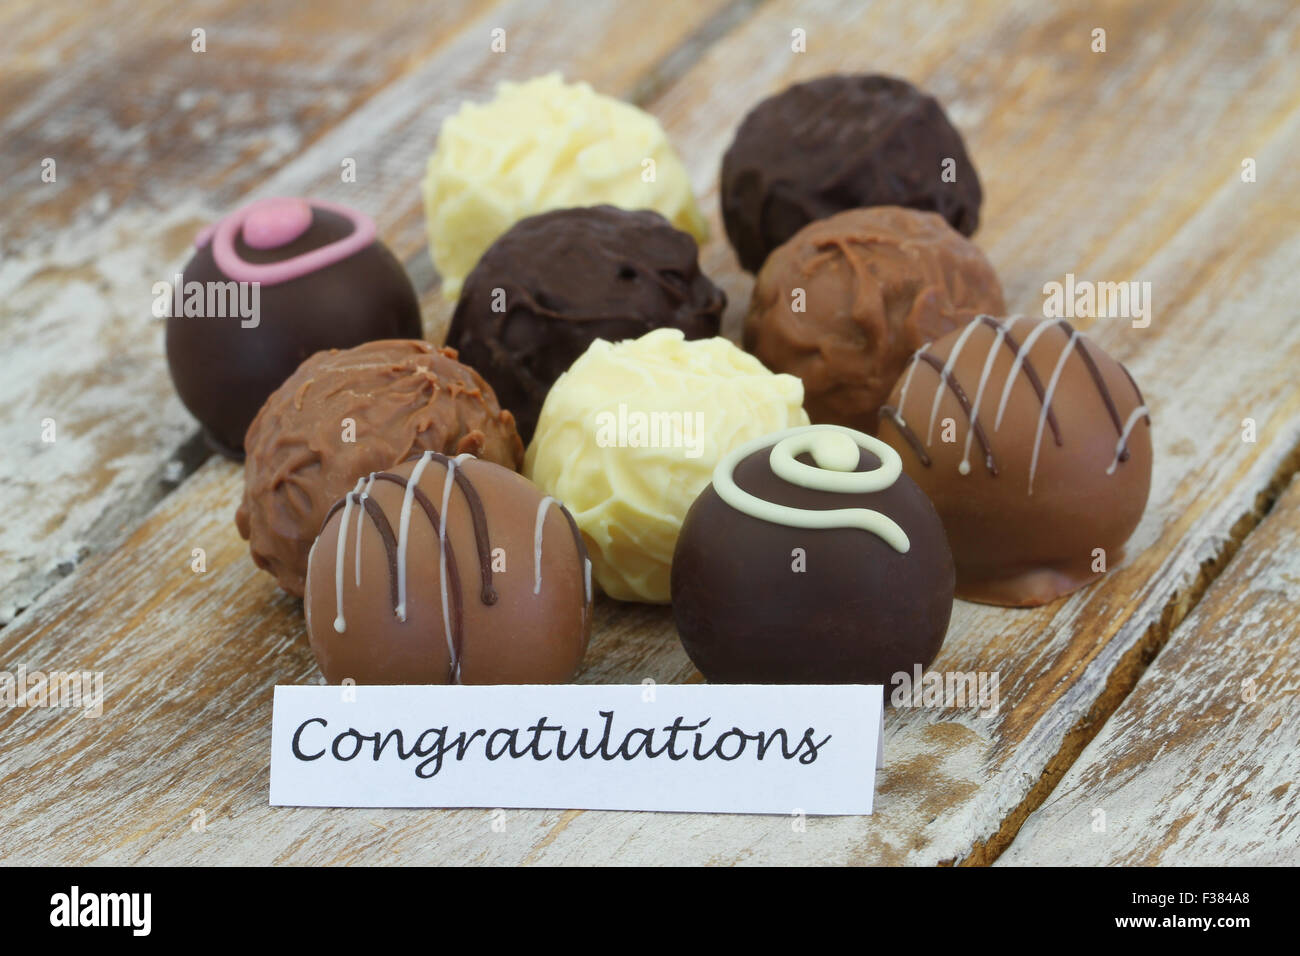 Congratulations card with assorted chocolates on rustic wooden surface Stock Photo